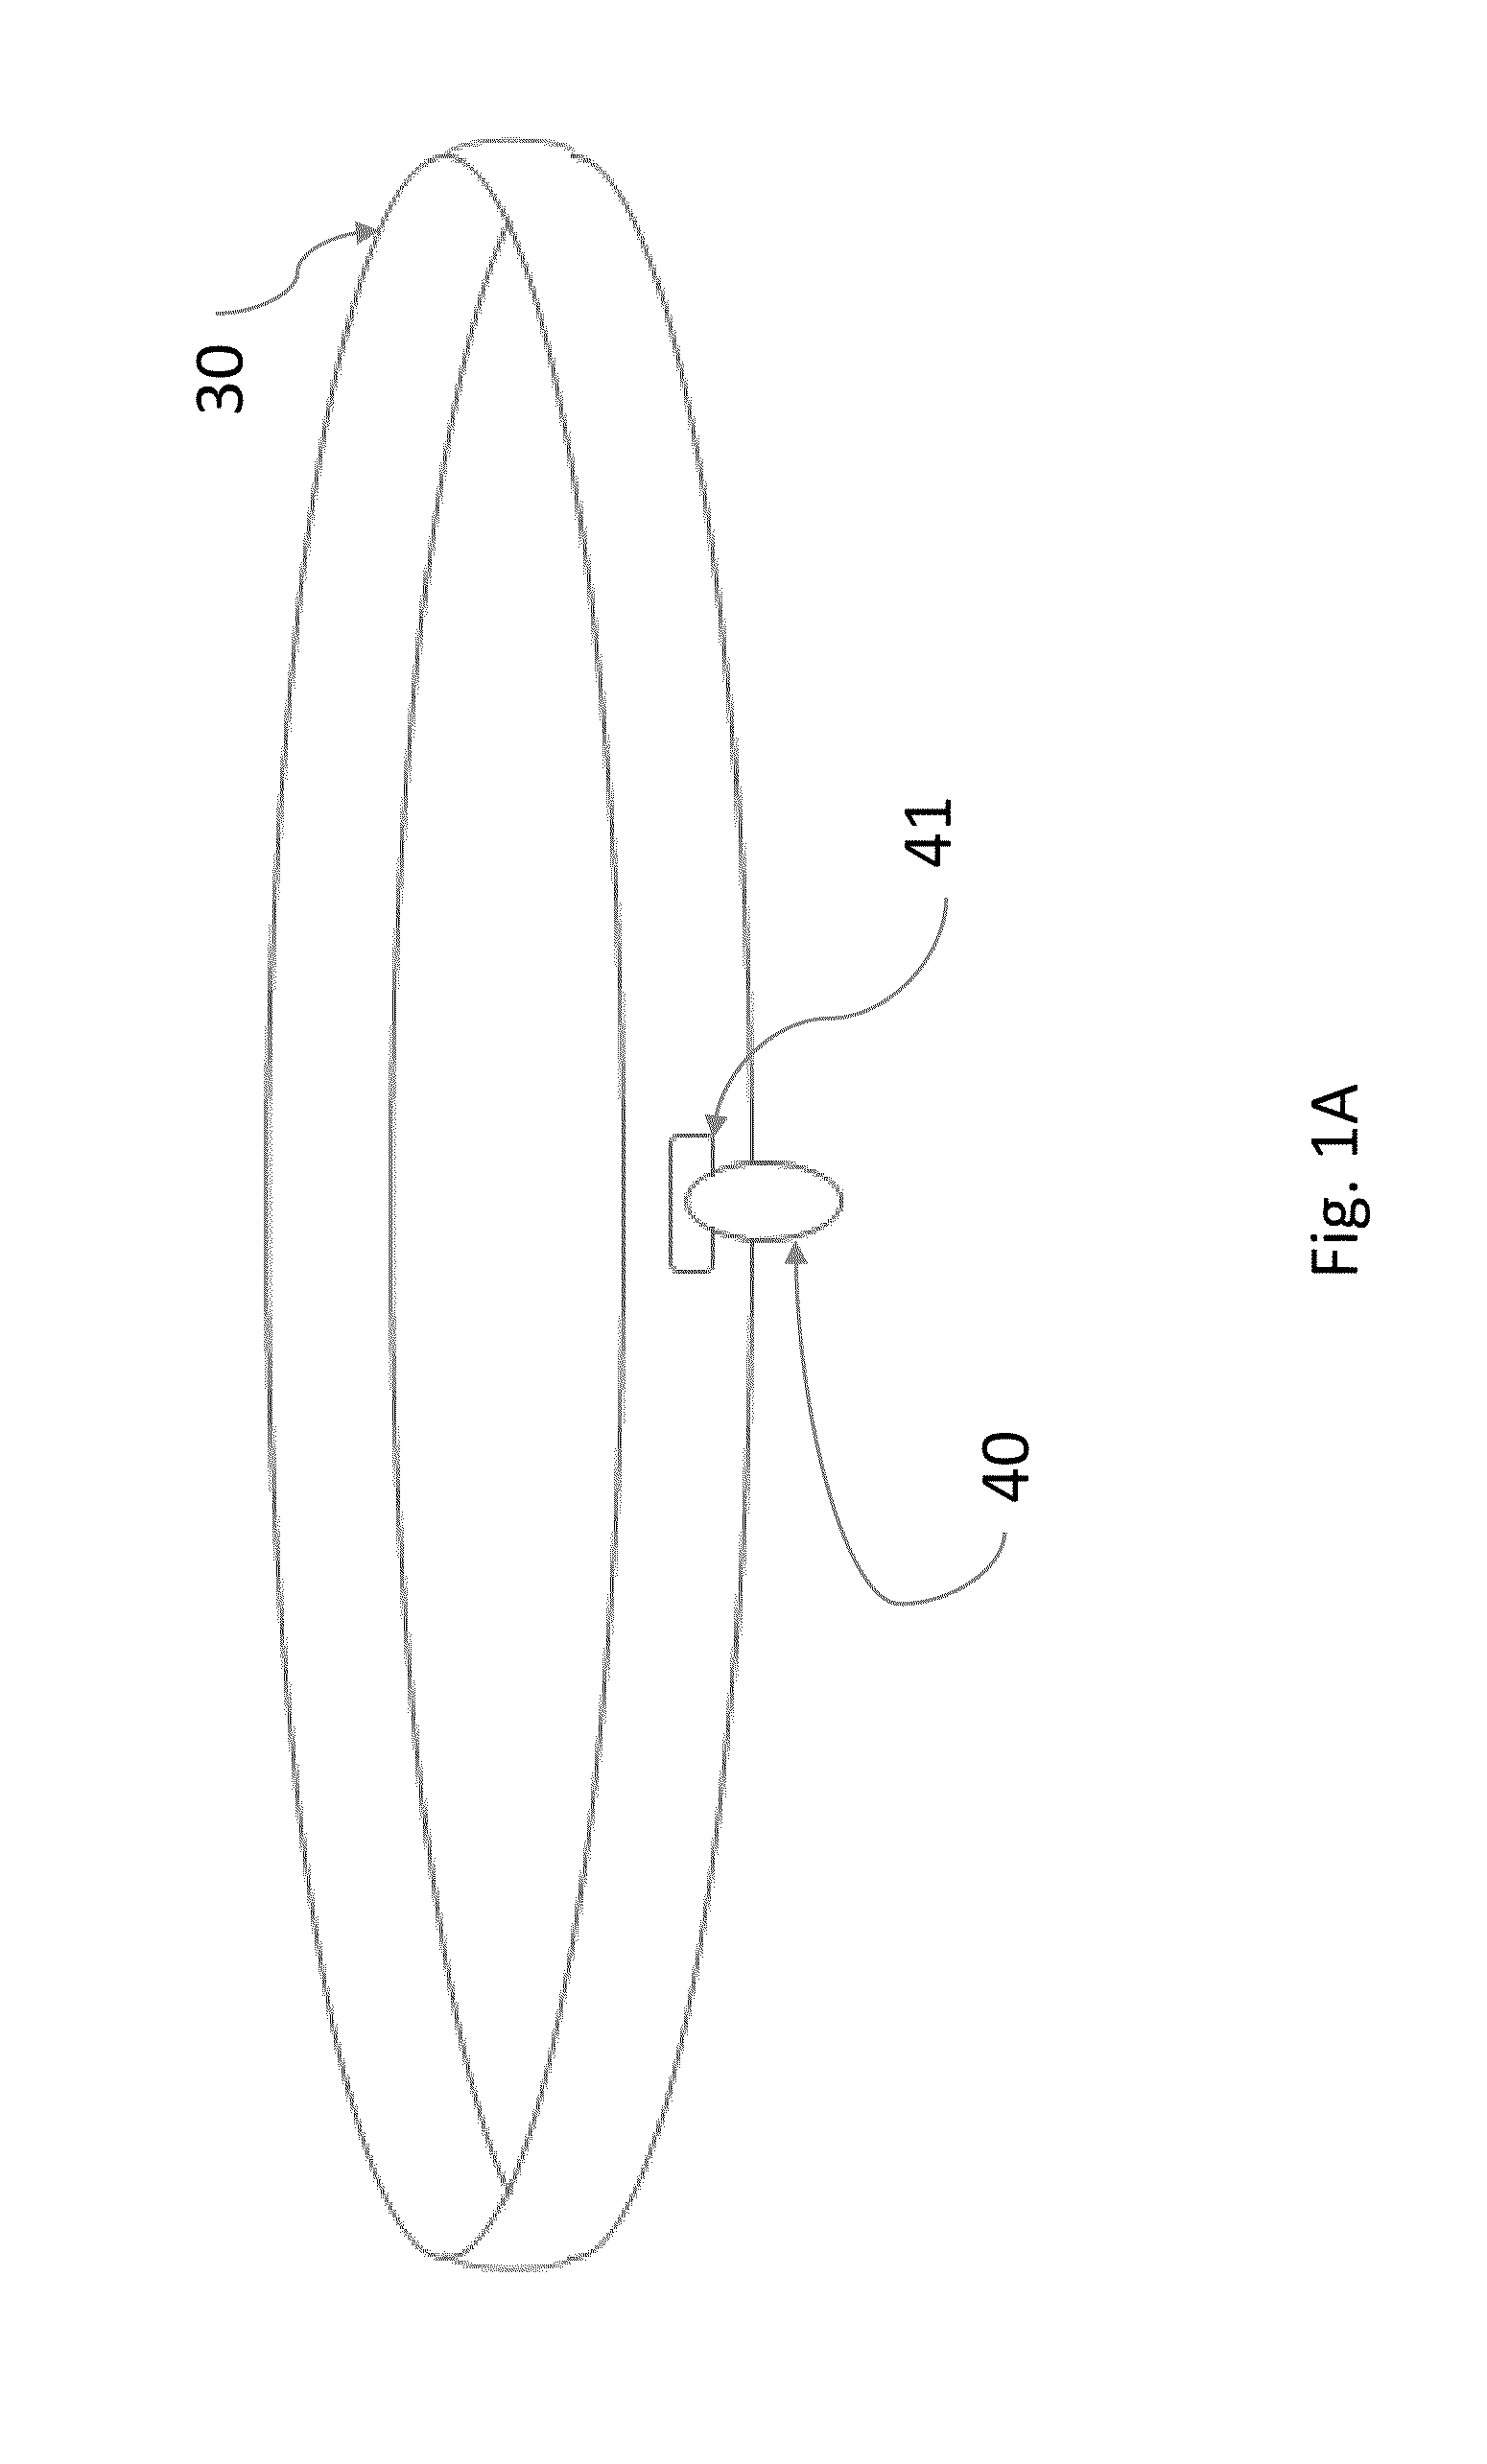 Eyeglass and medical device retainer and sensor